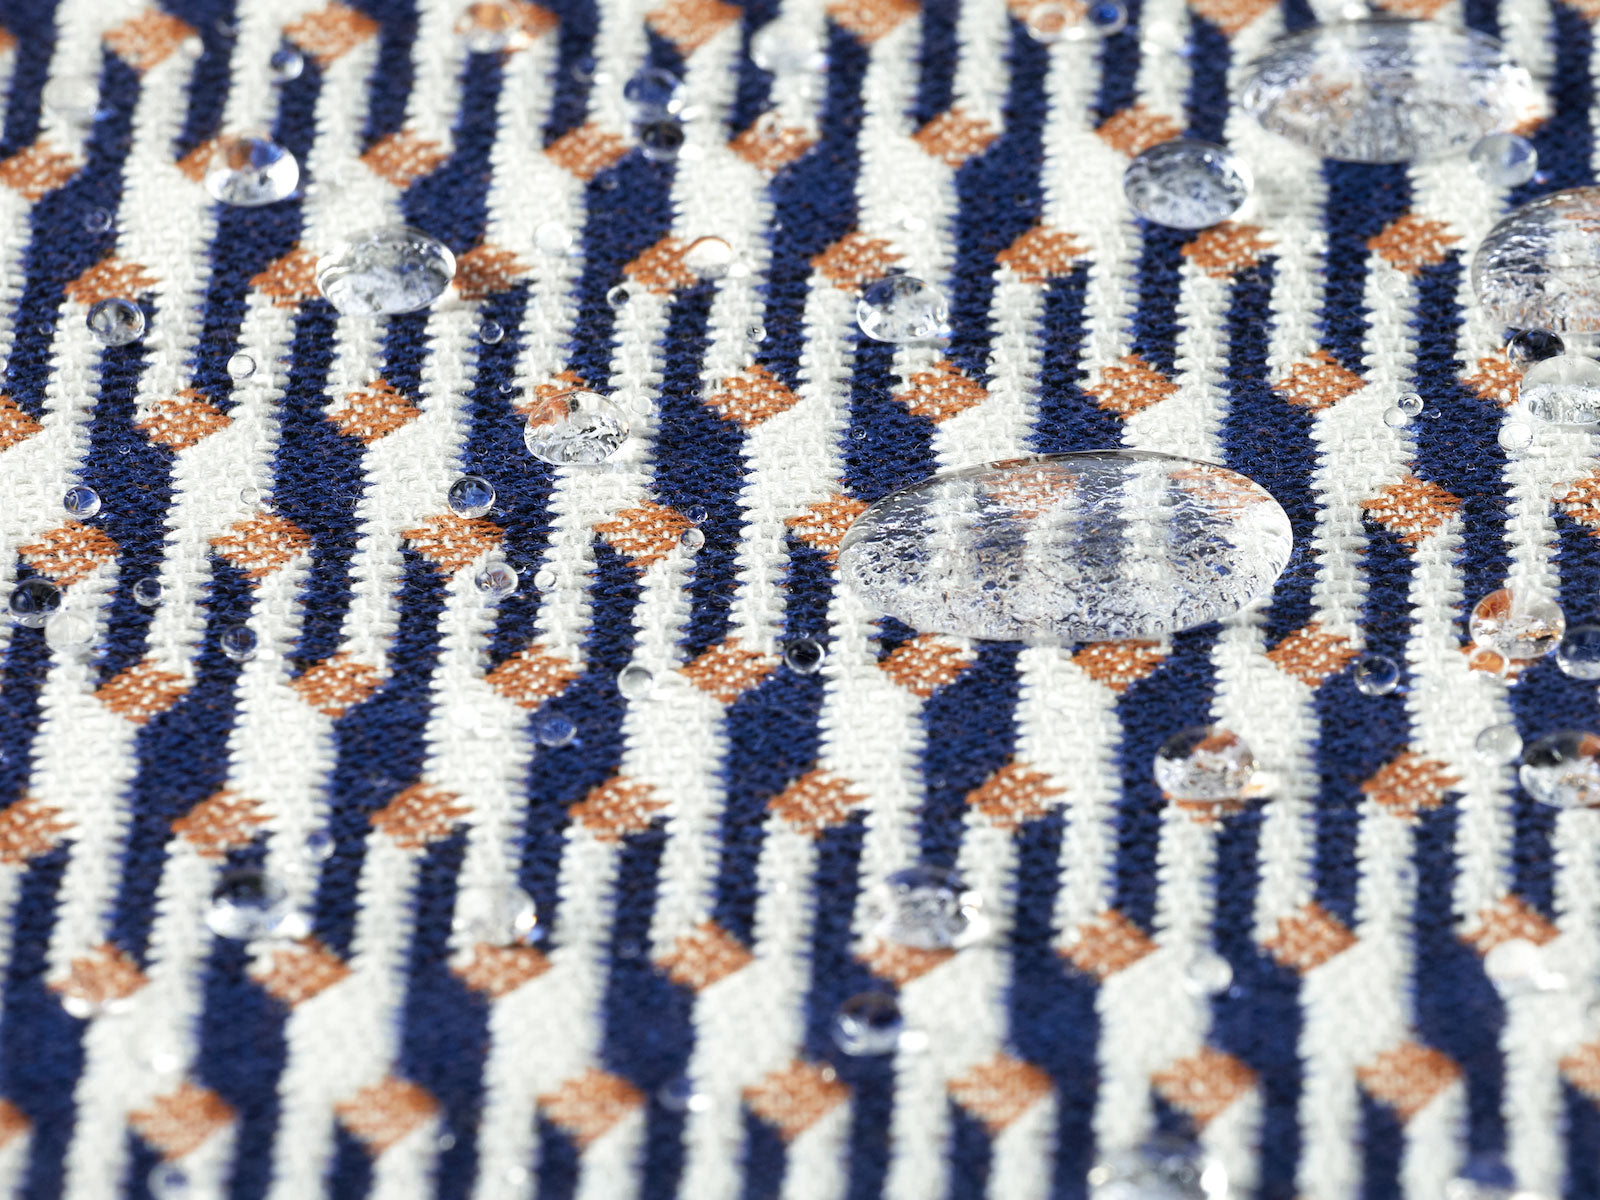 A waterproof outdoor fabric in blue, white and orange colors with several water droplets in frame. 